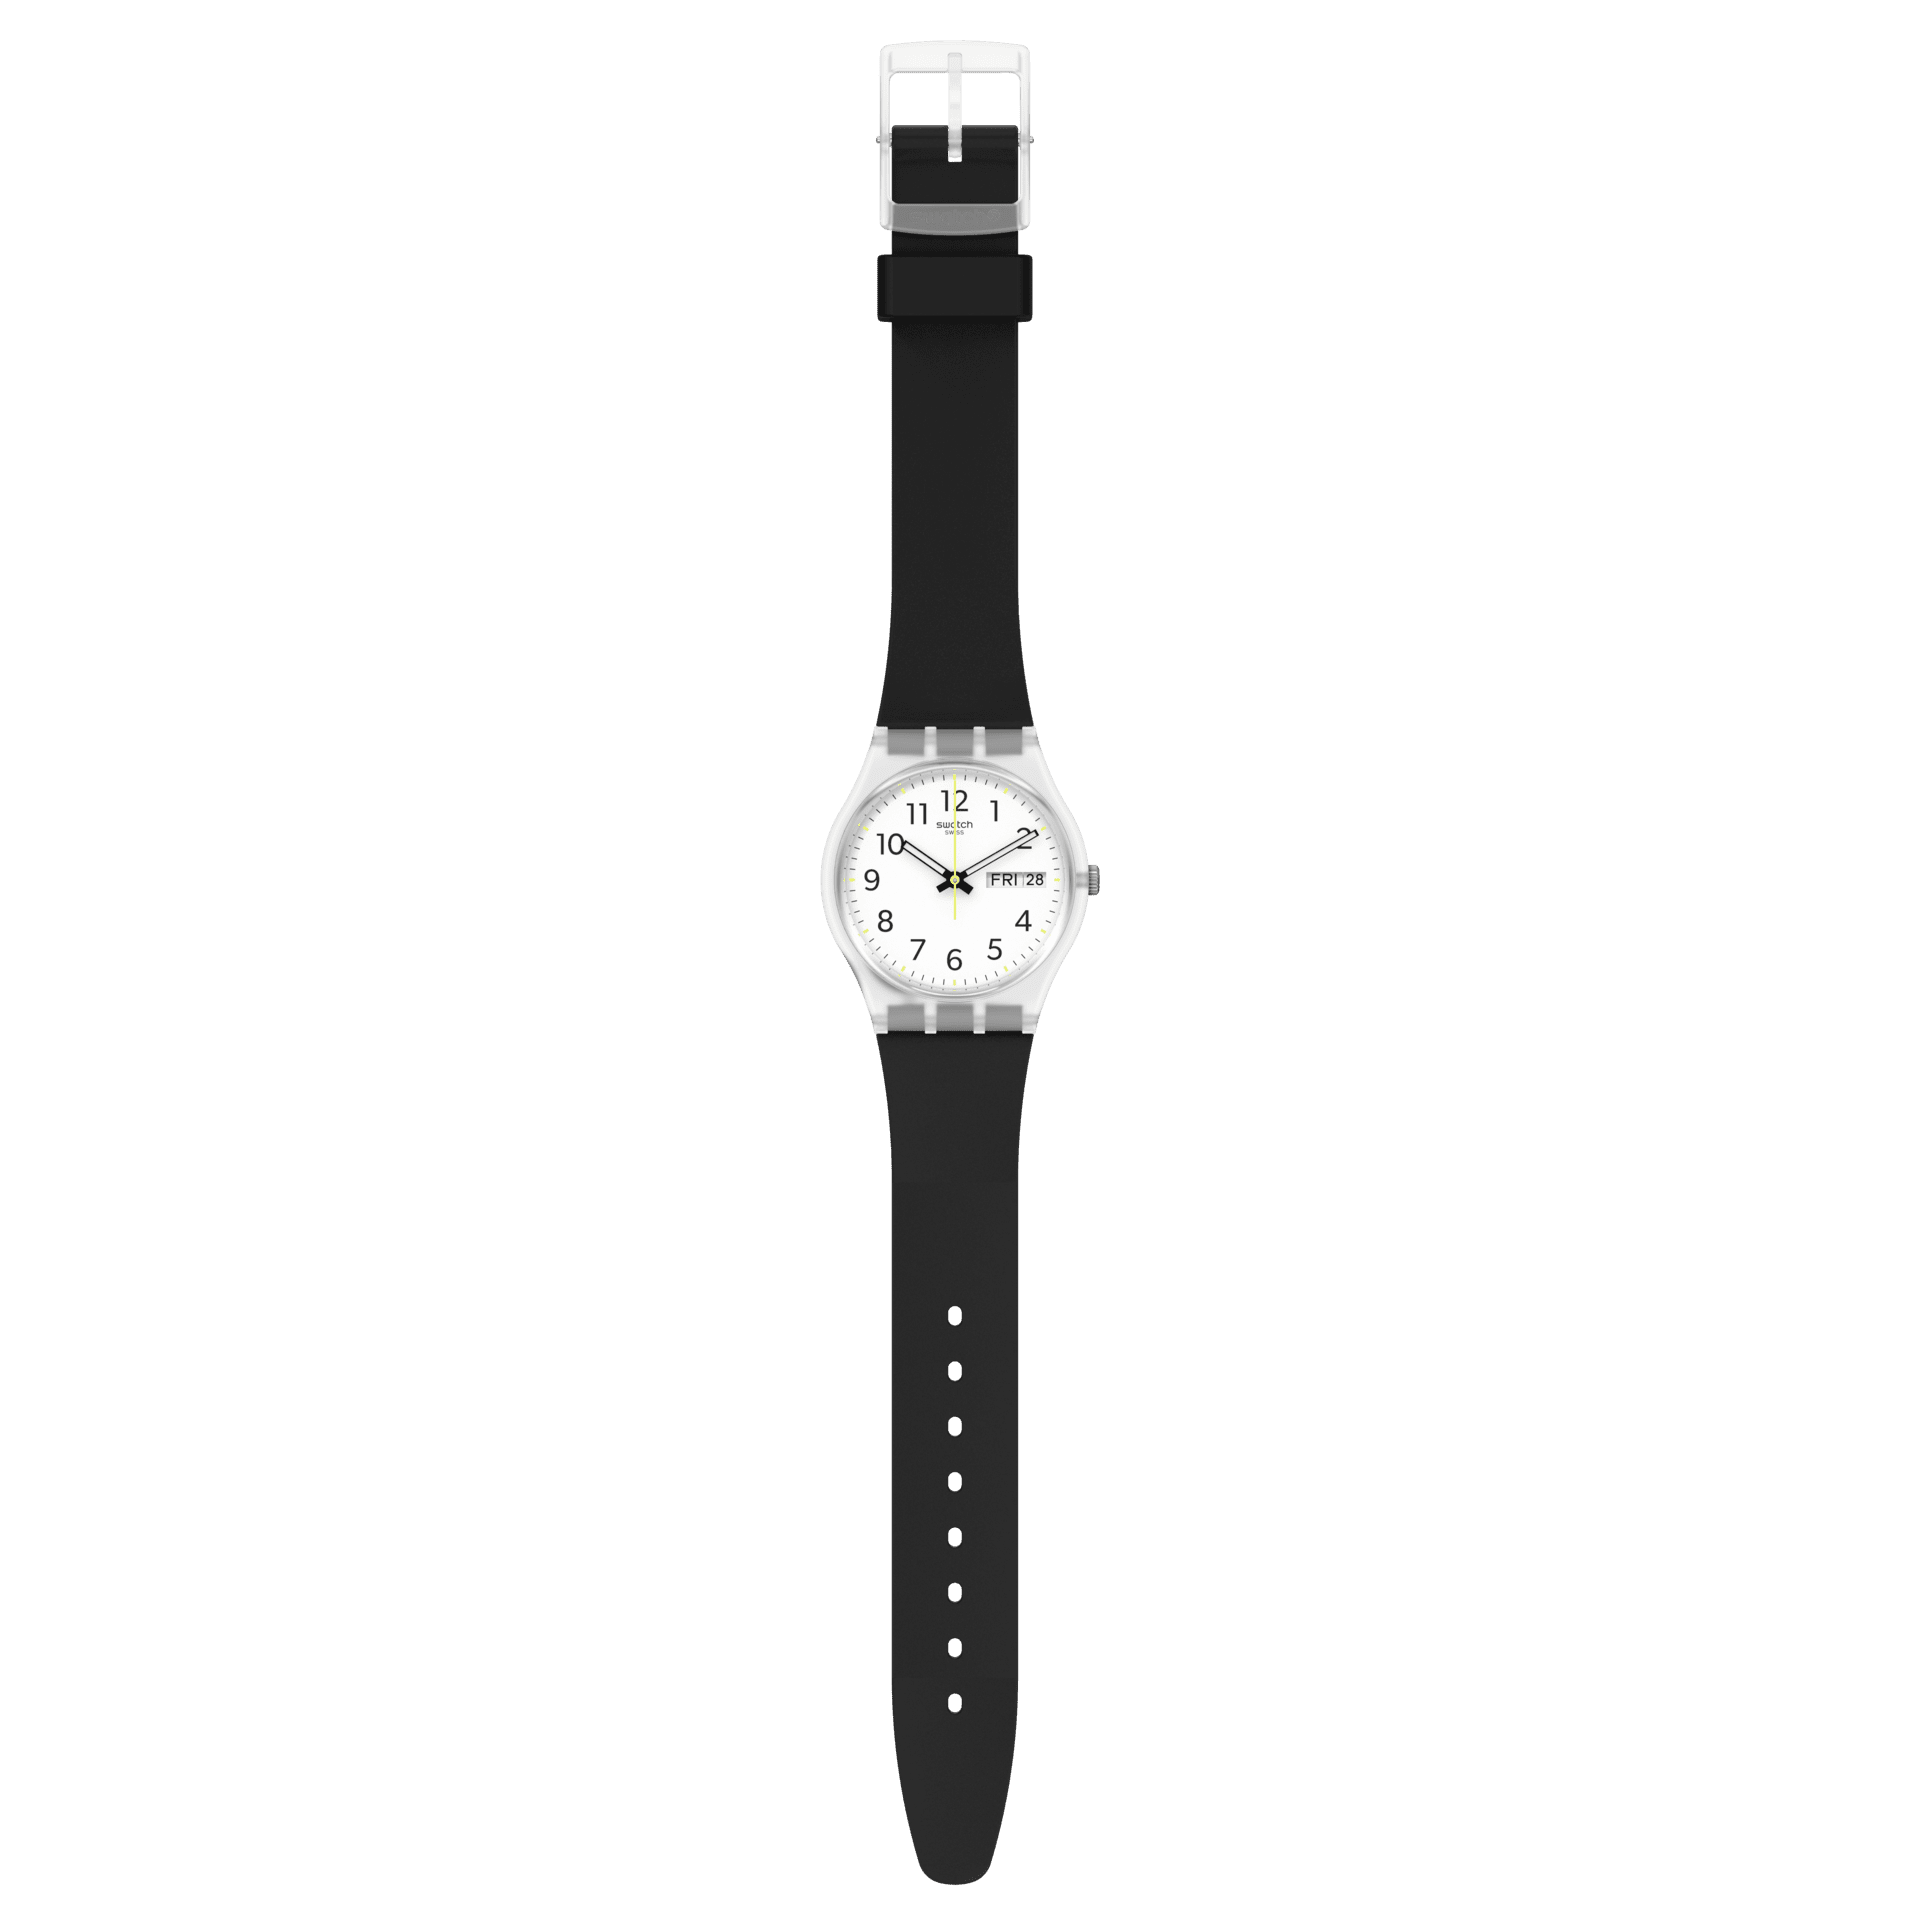 Swatch Watch Rinse Repeat Black 34mm